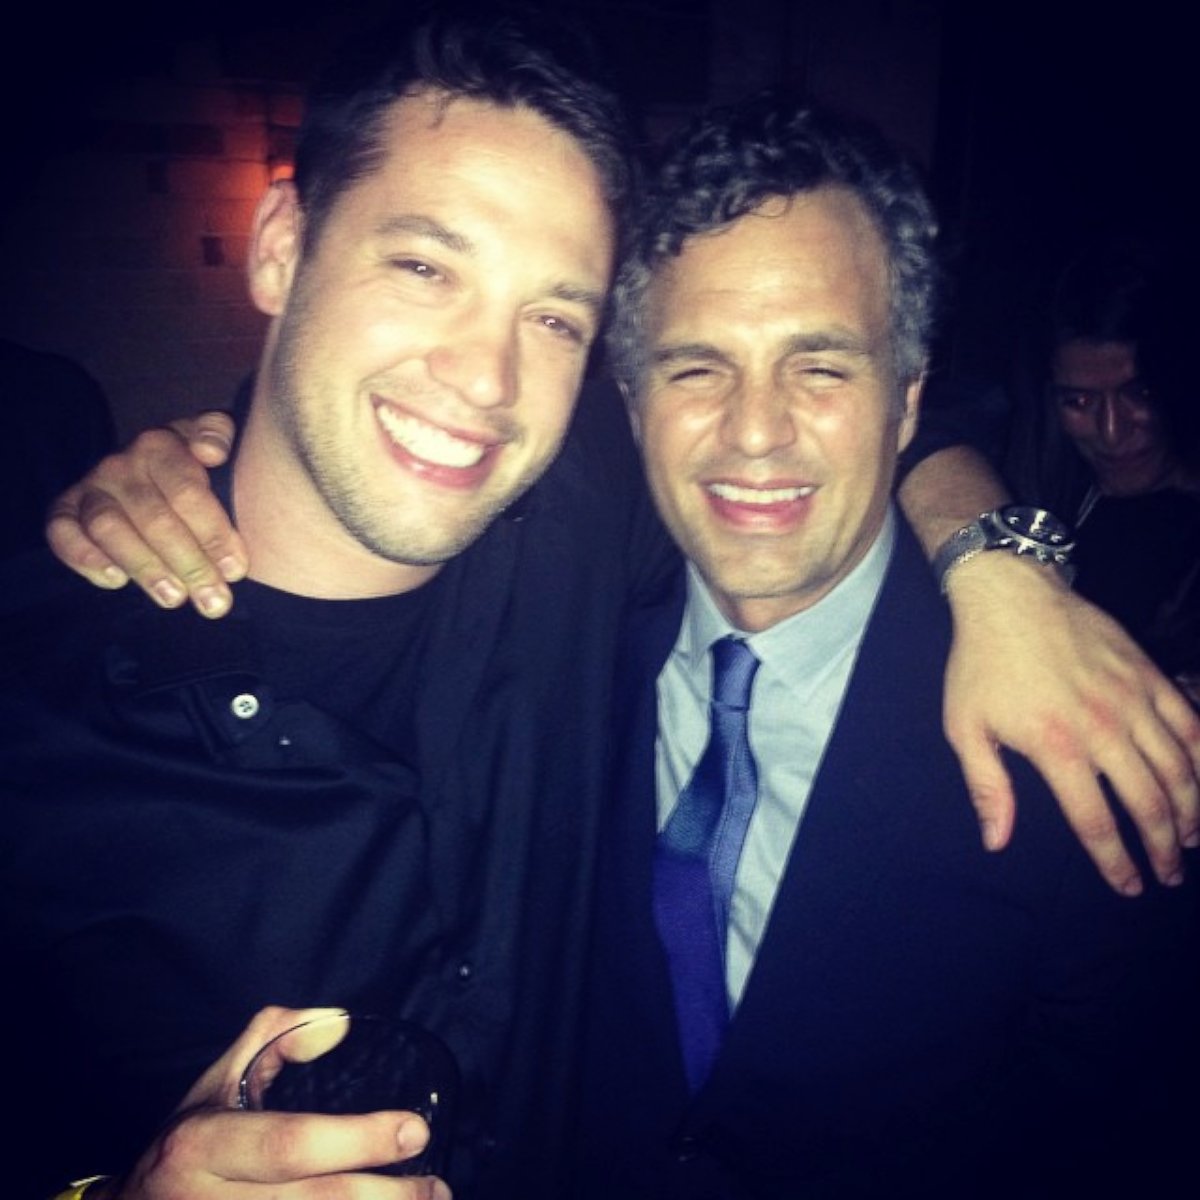 PHOTO: Alexander Schultz and Mark Ruffalo who plays his father in "Foxcatcher."